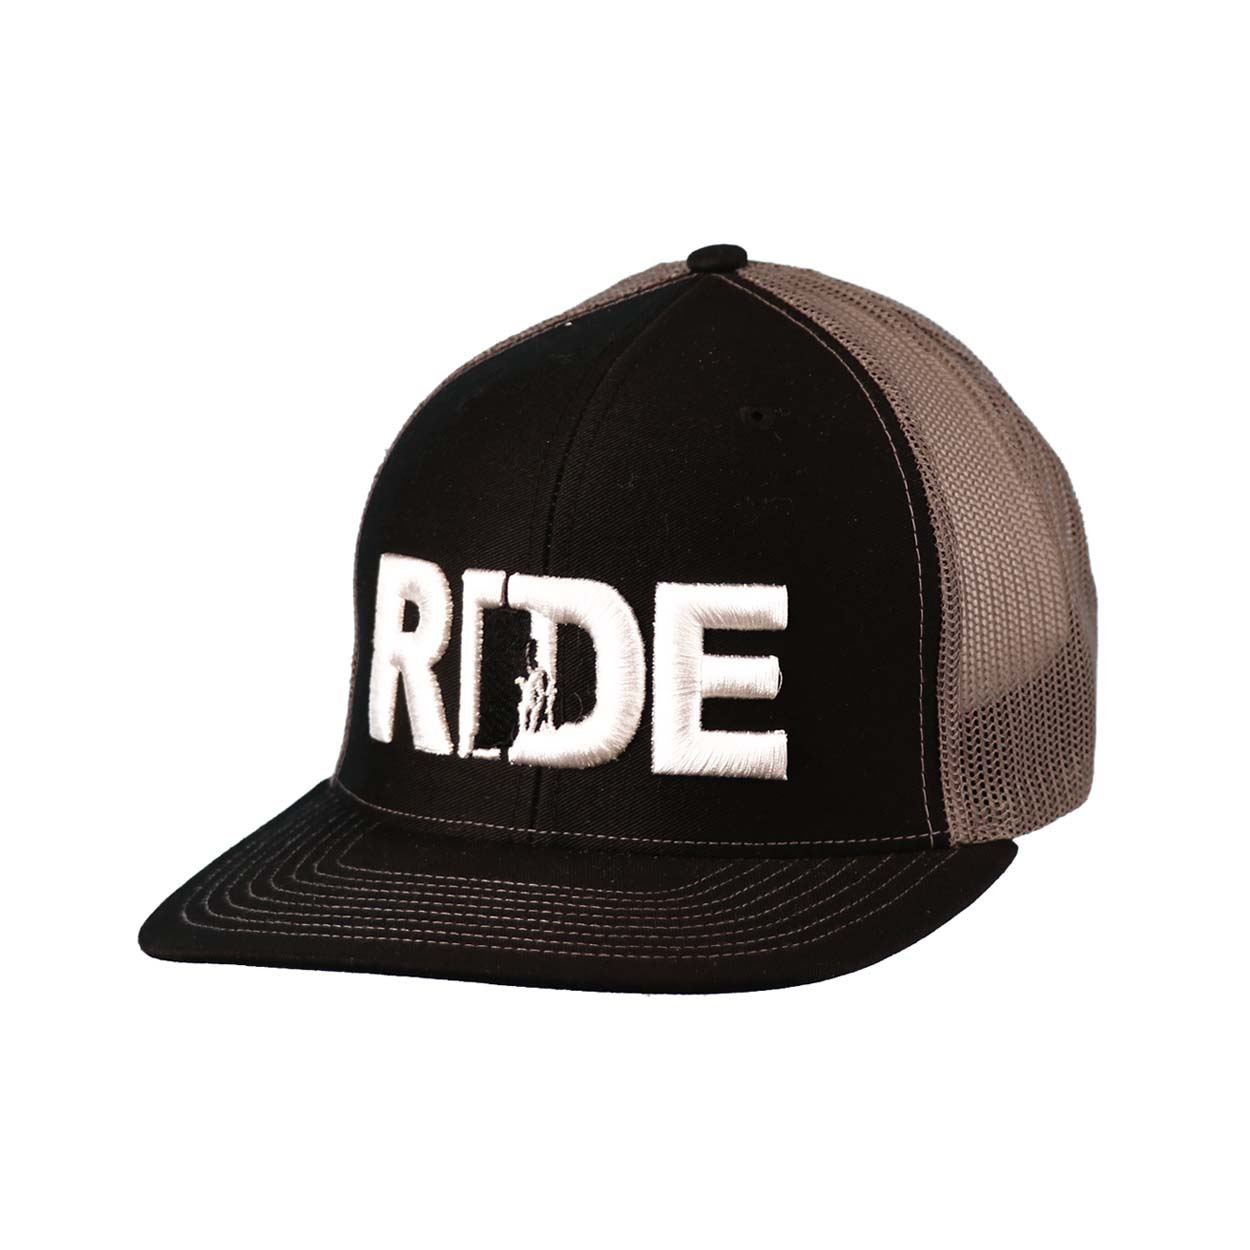 Ride Rhode Island Classic Embroidered Snapback Trucker Hat Black/Charcoal